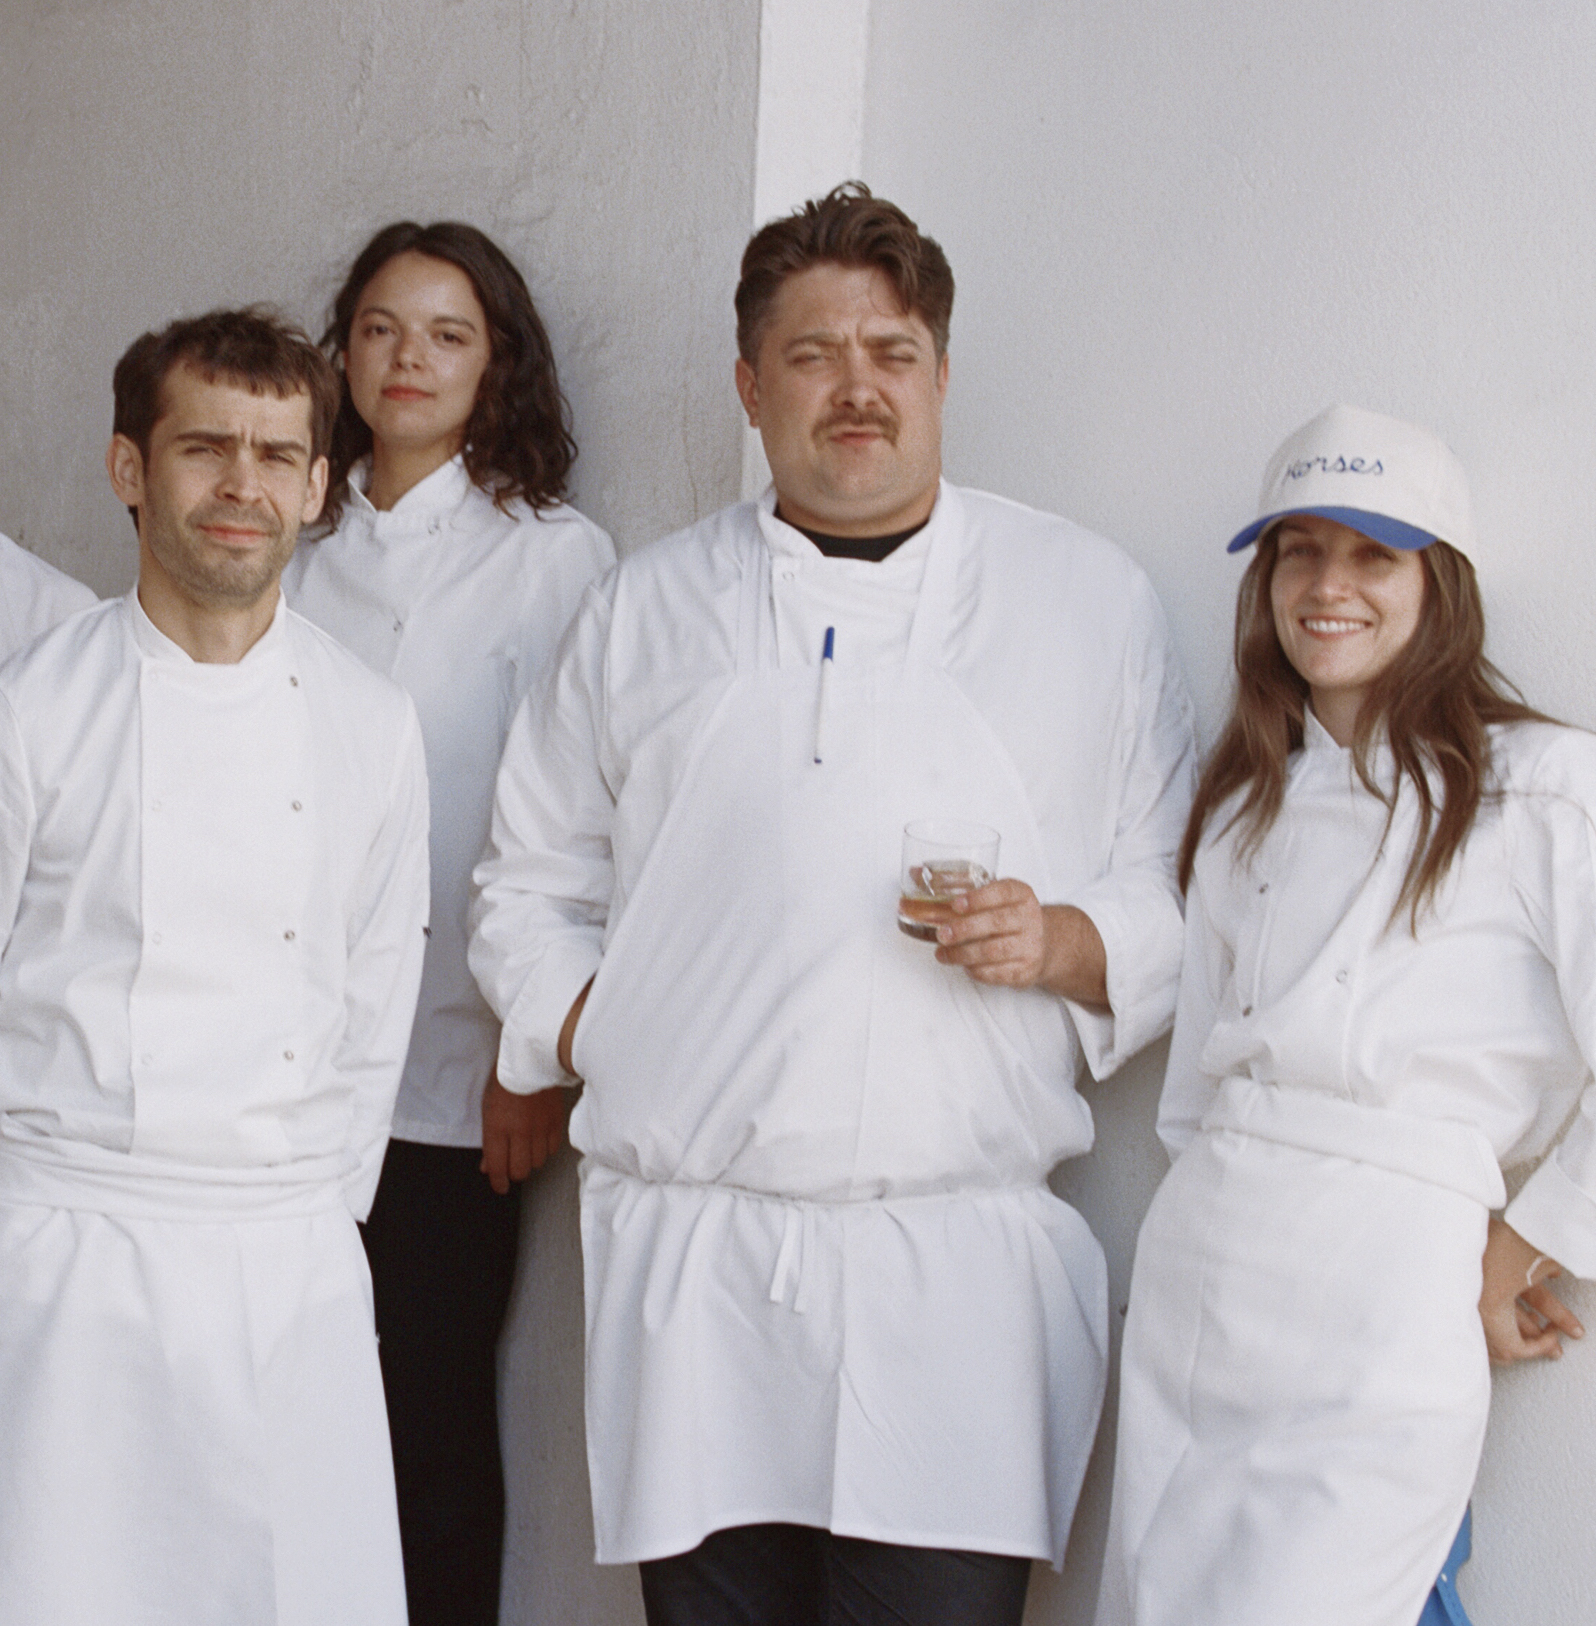 Chef team of Horses in Hollywood, with chef-owner Will Aghajanian on the far left and his spouse/co-chef-owner Liz Johnson on the far right.